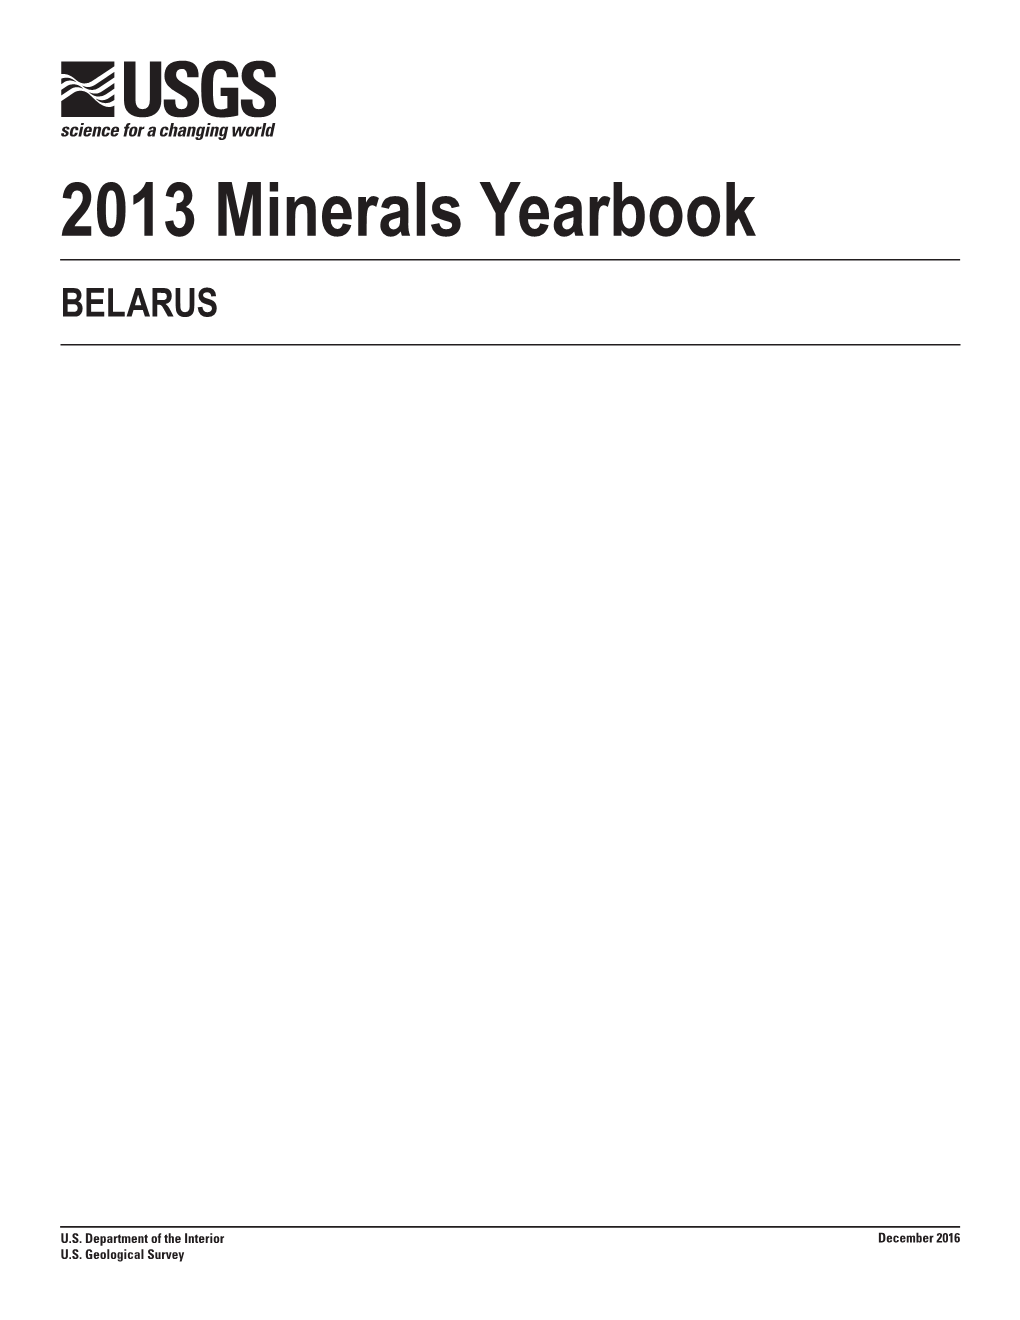 The Mineral Industry of Belarus in 2013